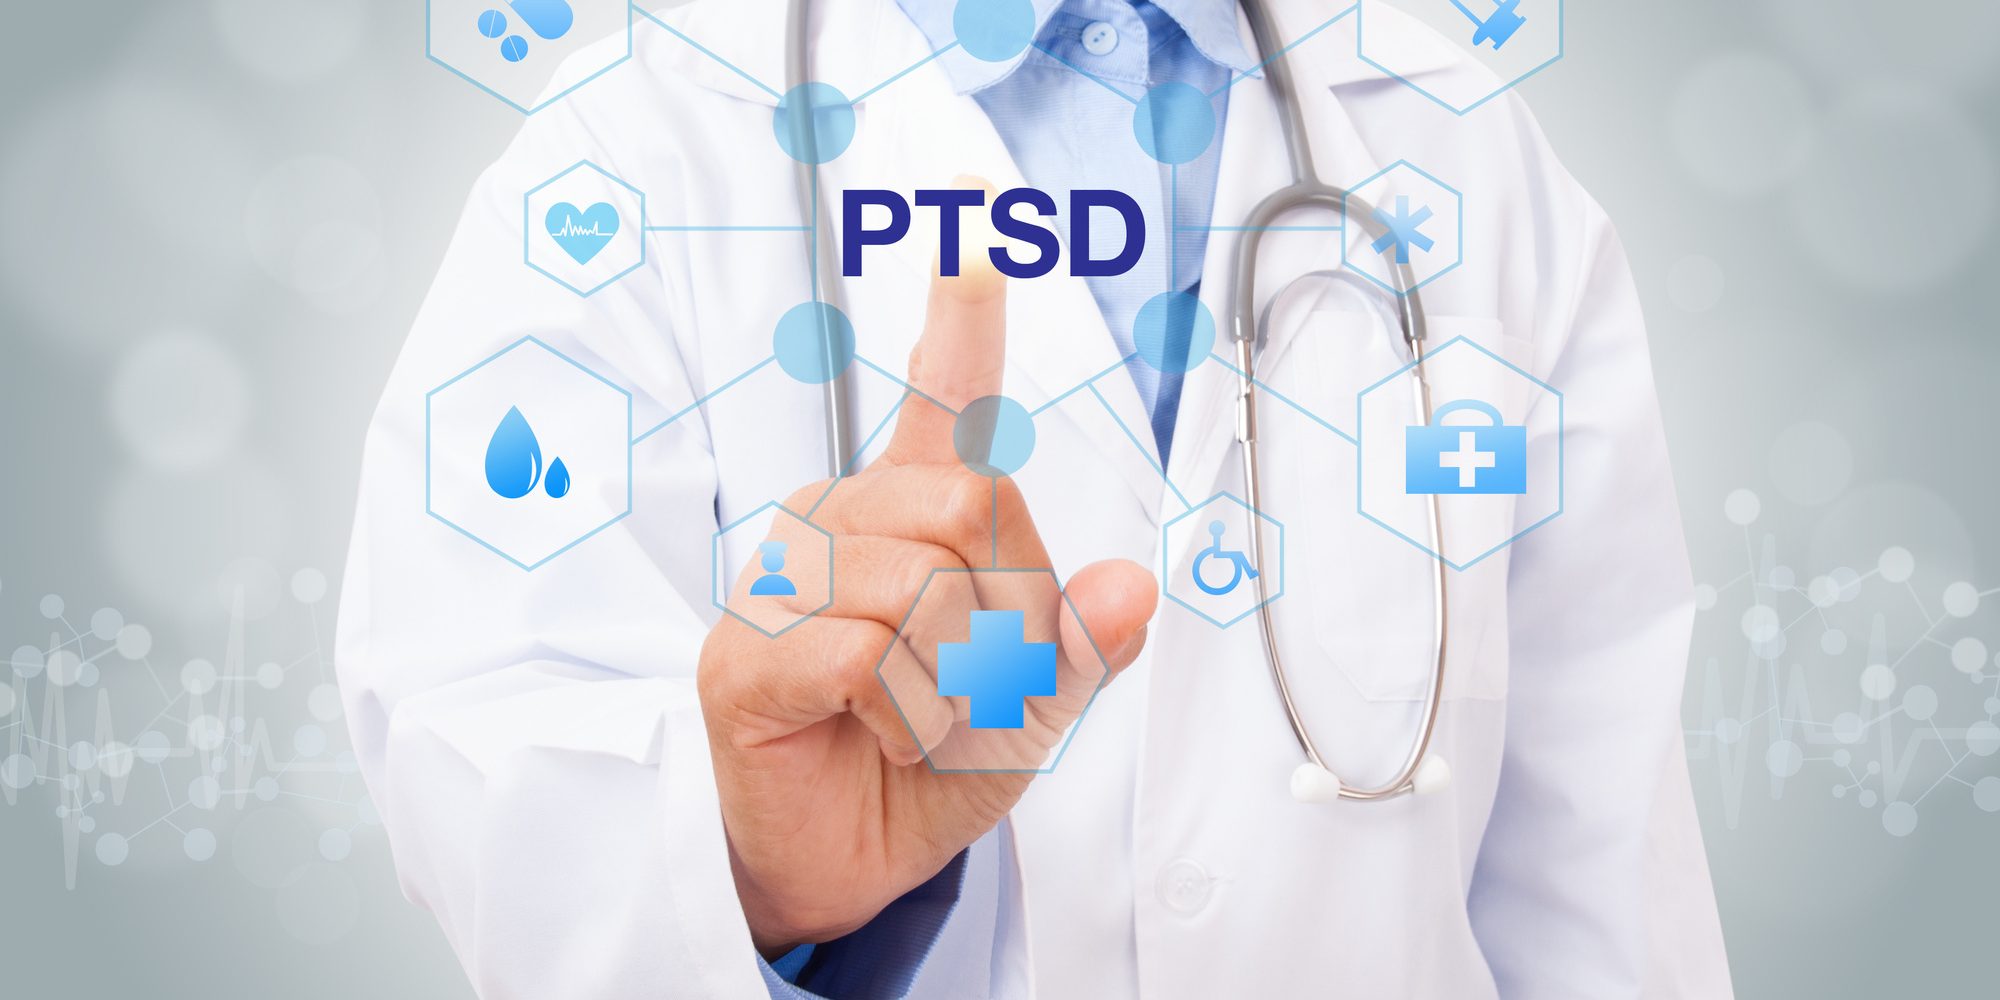 The risk of PTSD for medical personnel during a pandemic